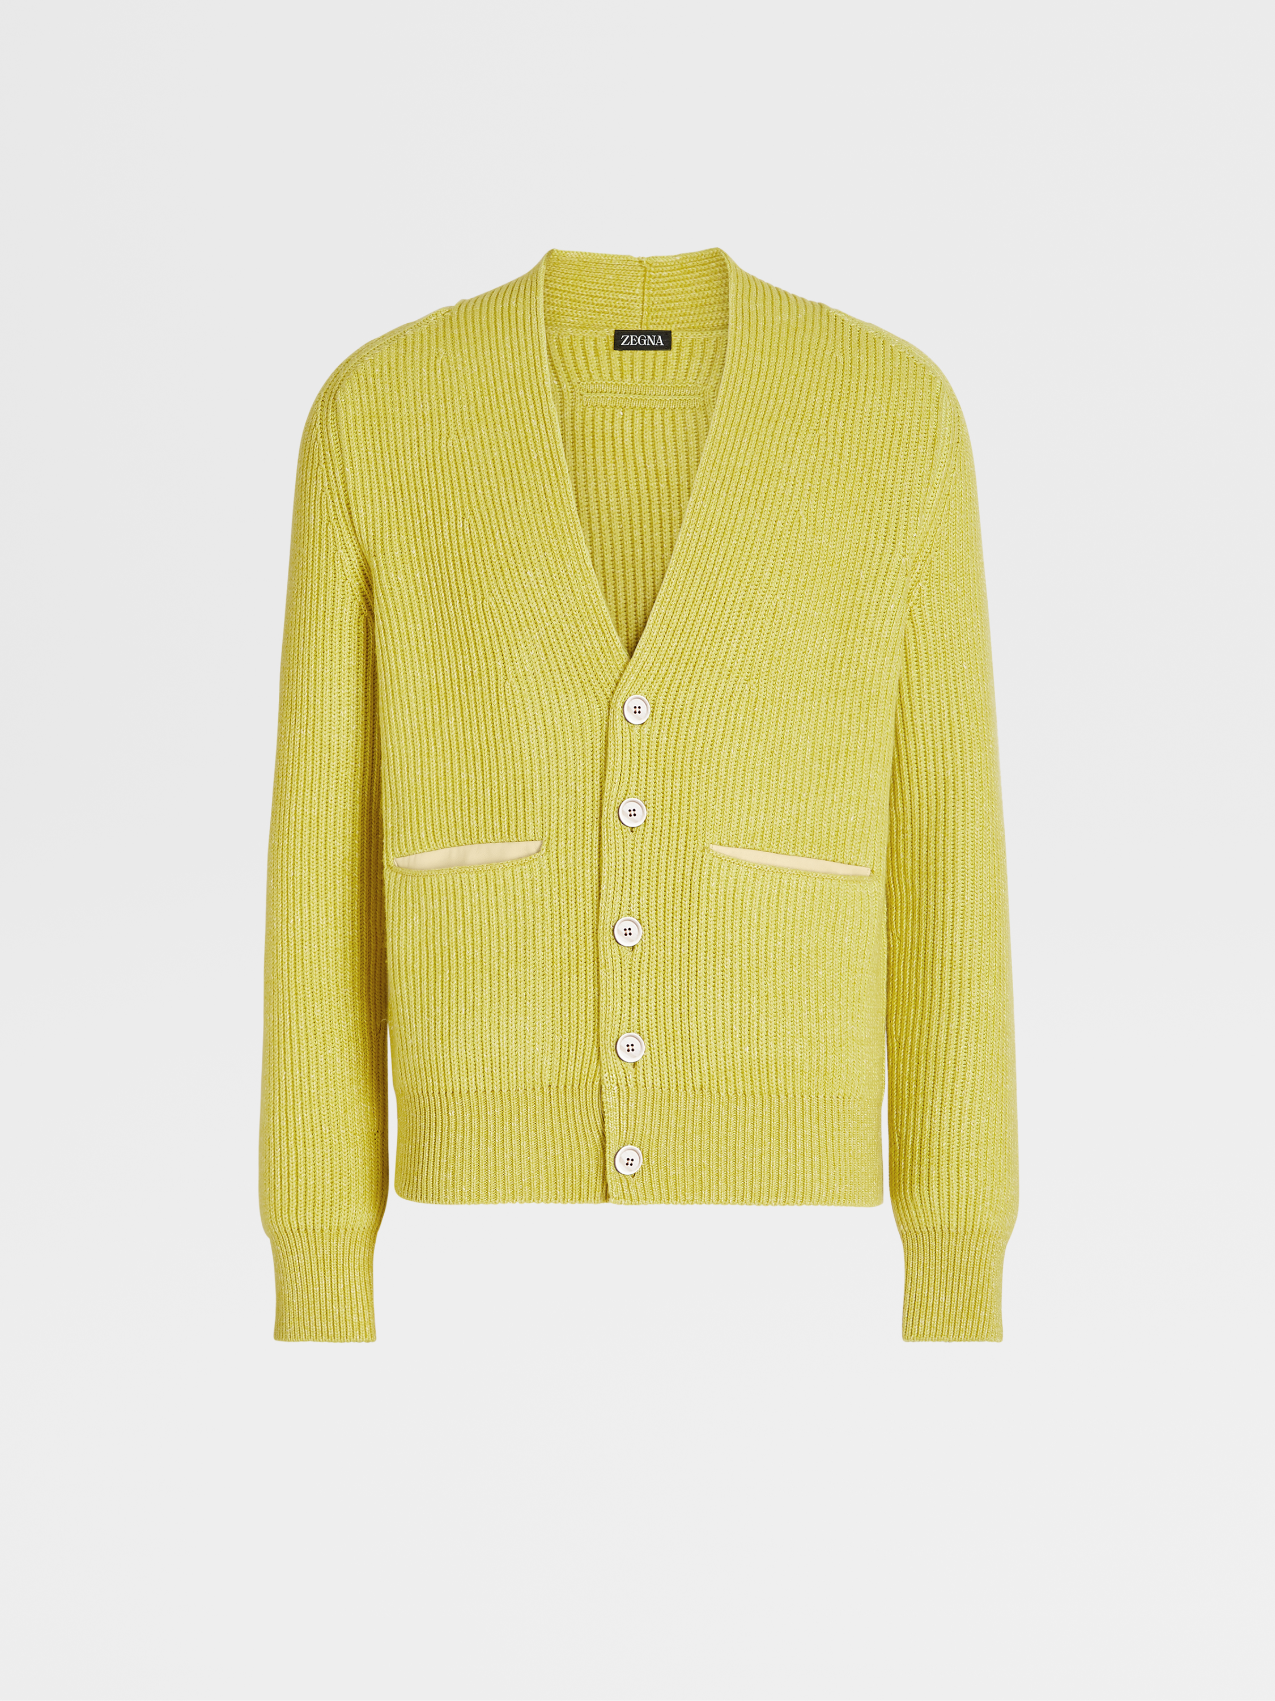 Yellow Cashmere Linen and Cotton Knit Cardigan